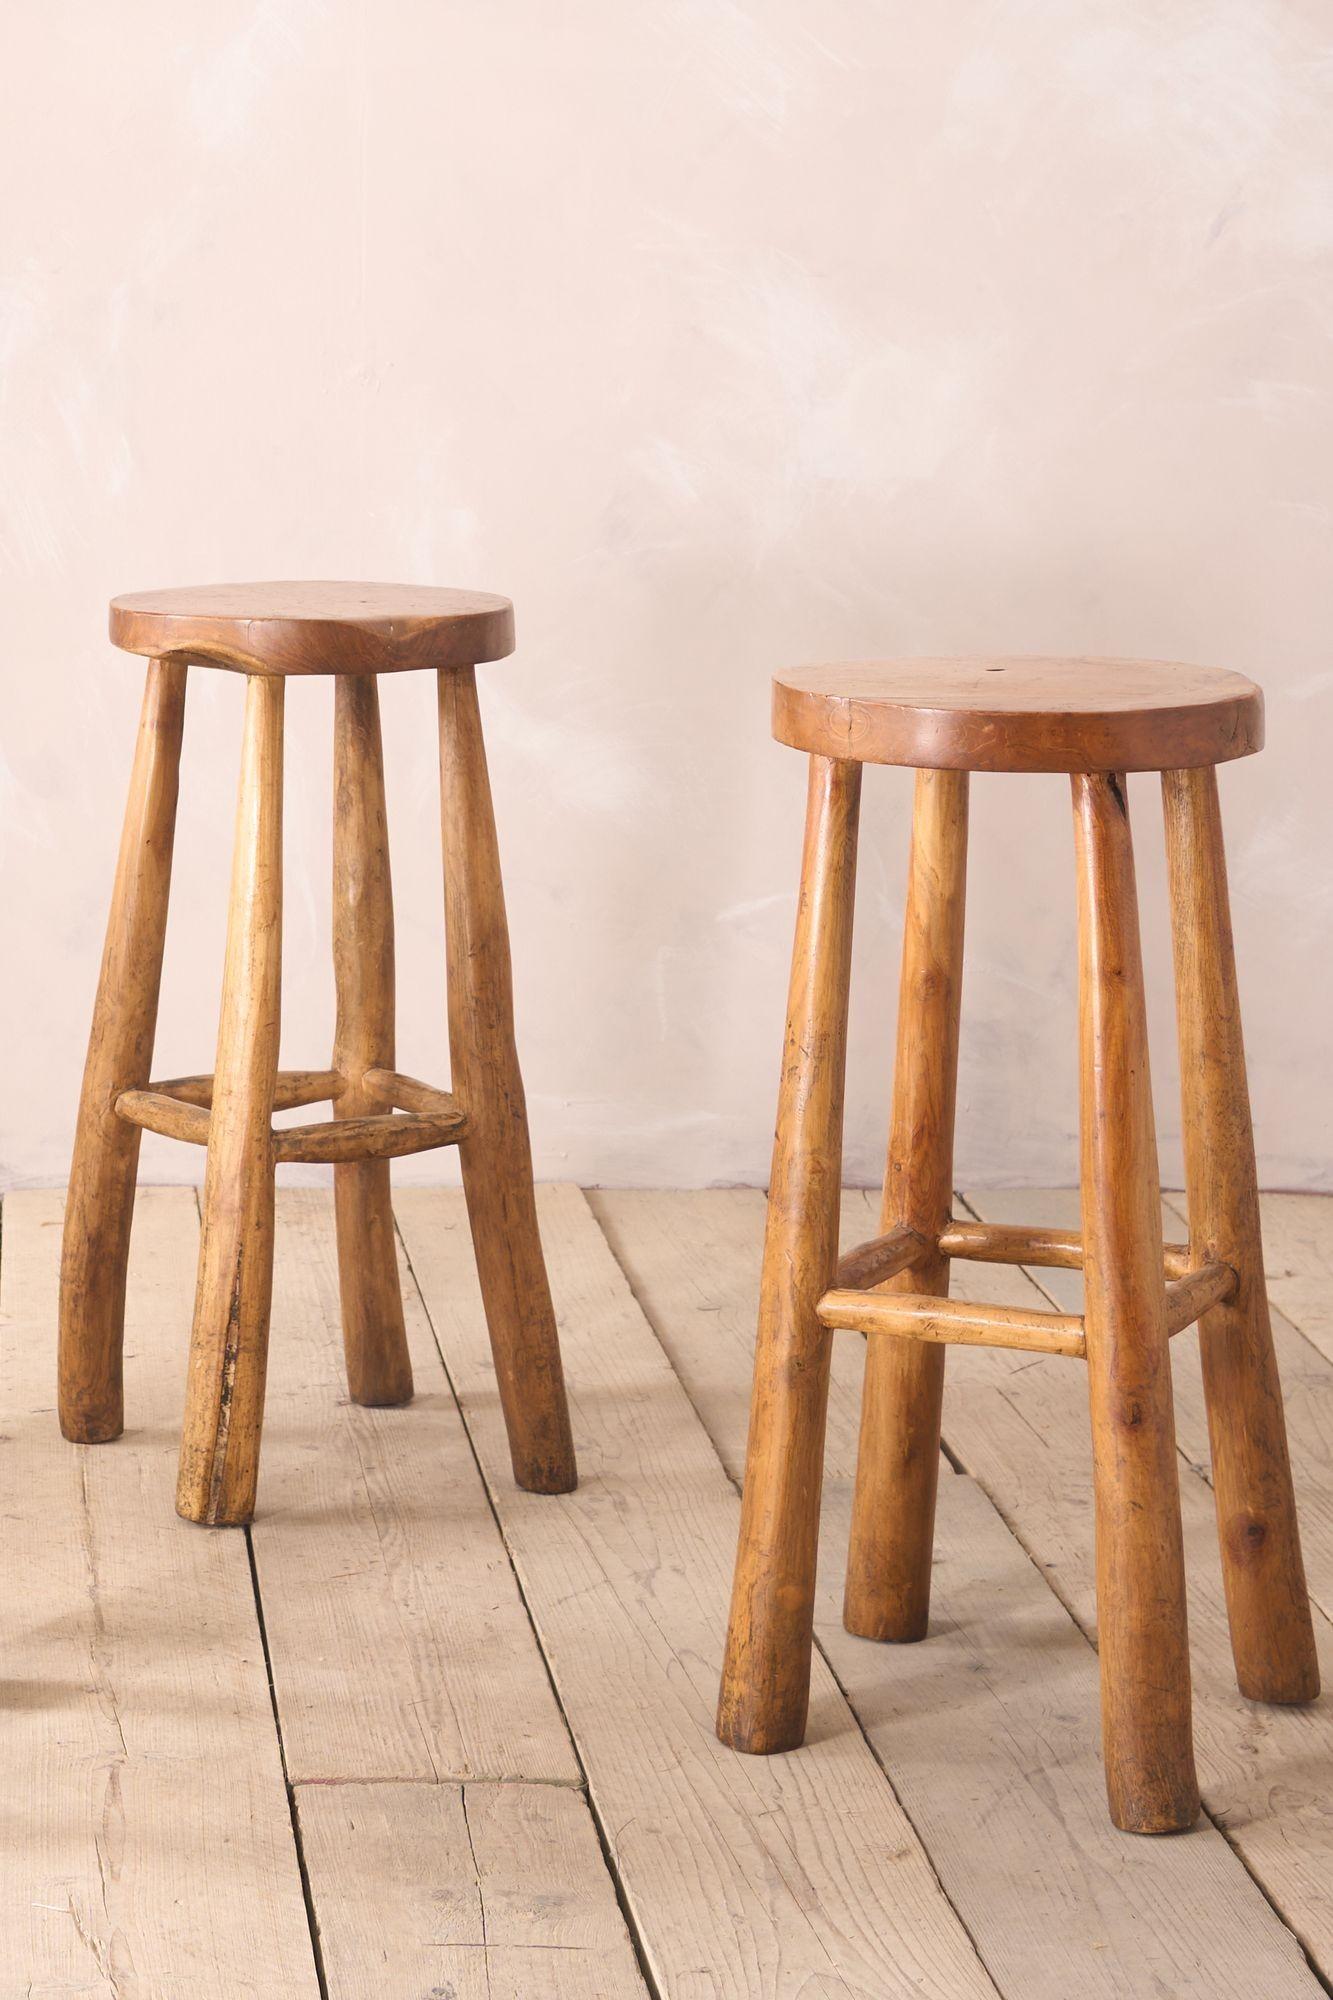 These are a great looking set of 4 Cherrywood bar stools. Most likely French in origin. The design is great with the irregular almost branch like legs. The tops have amazing patina and are tactile. The whole set is a stand out piece and are sure to